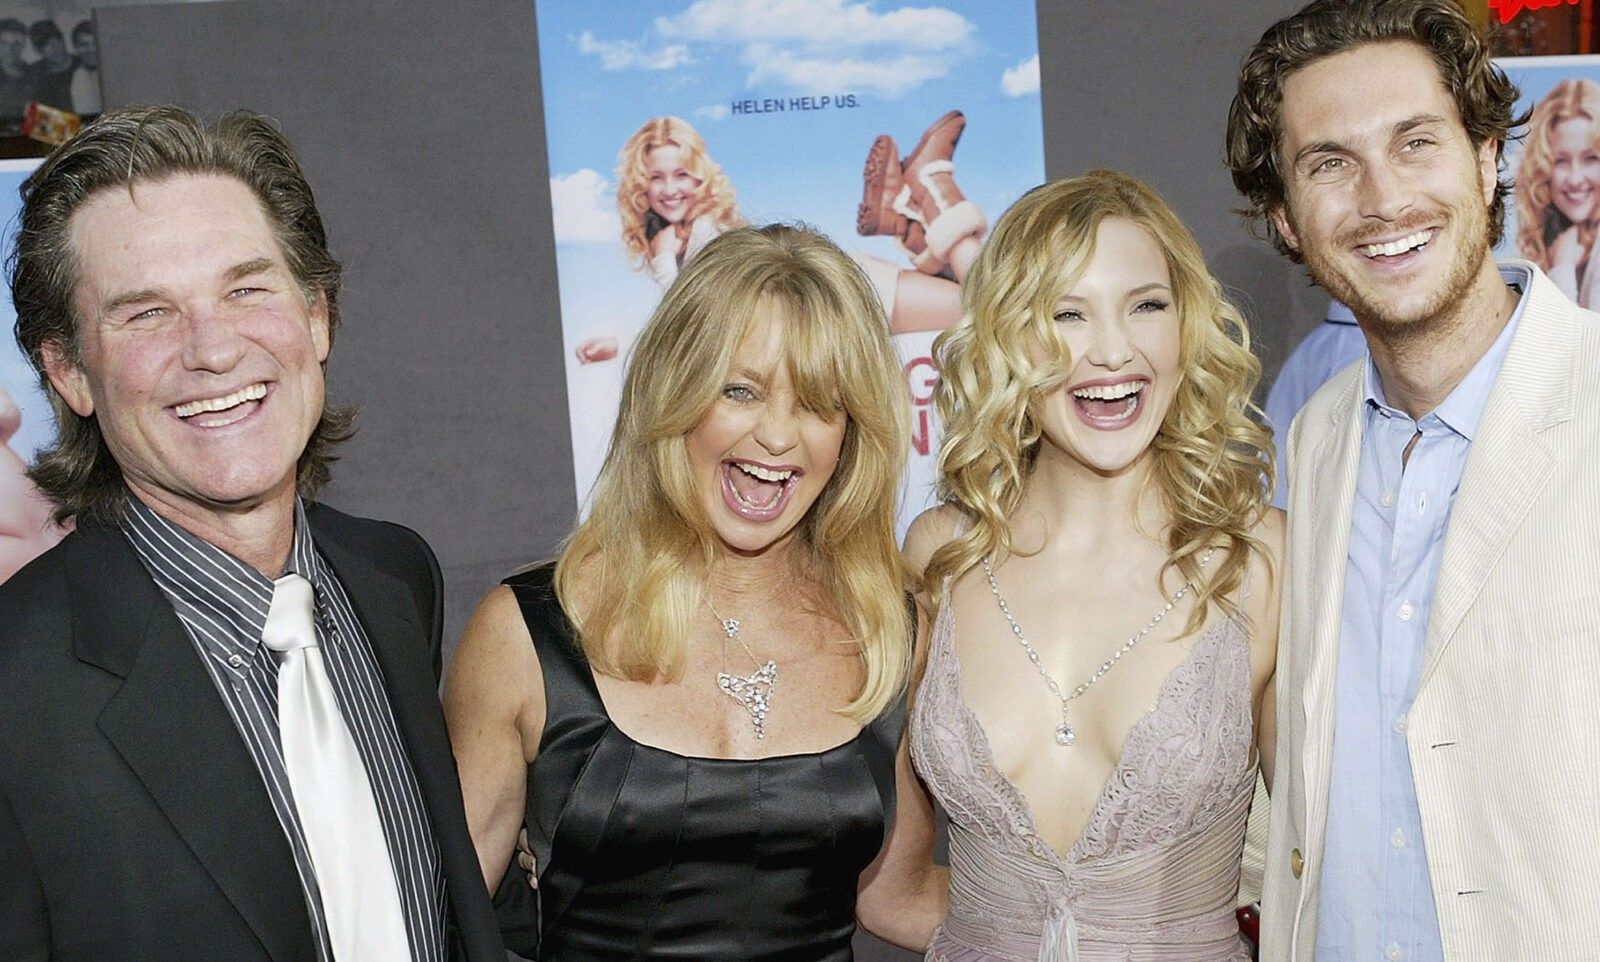 Kate Hudson and Goldie Hawn Have a Golden Mother-Daughter Date